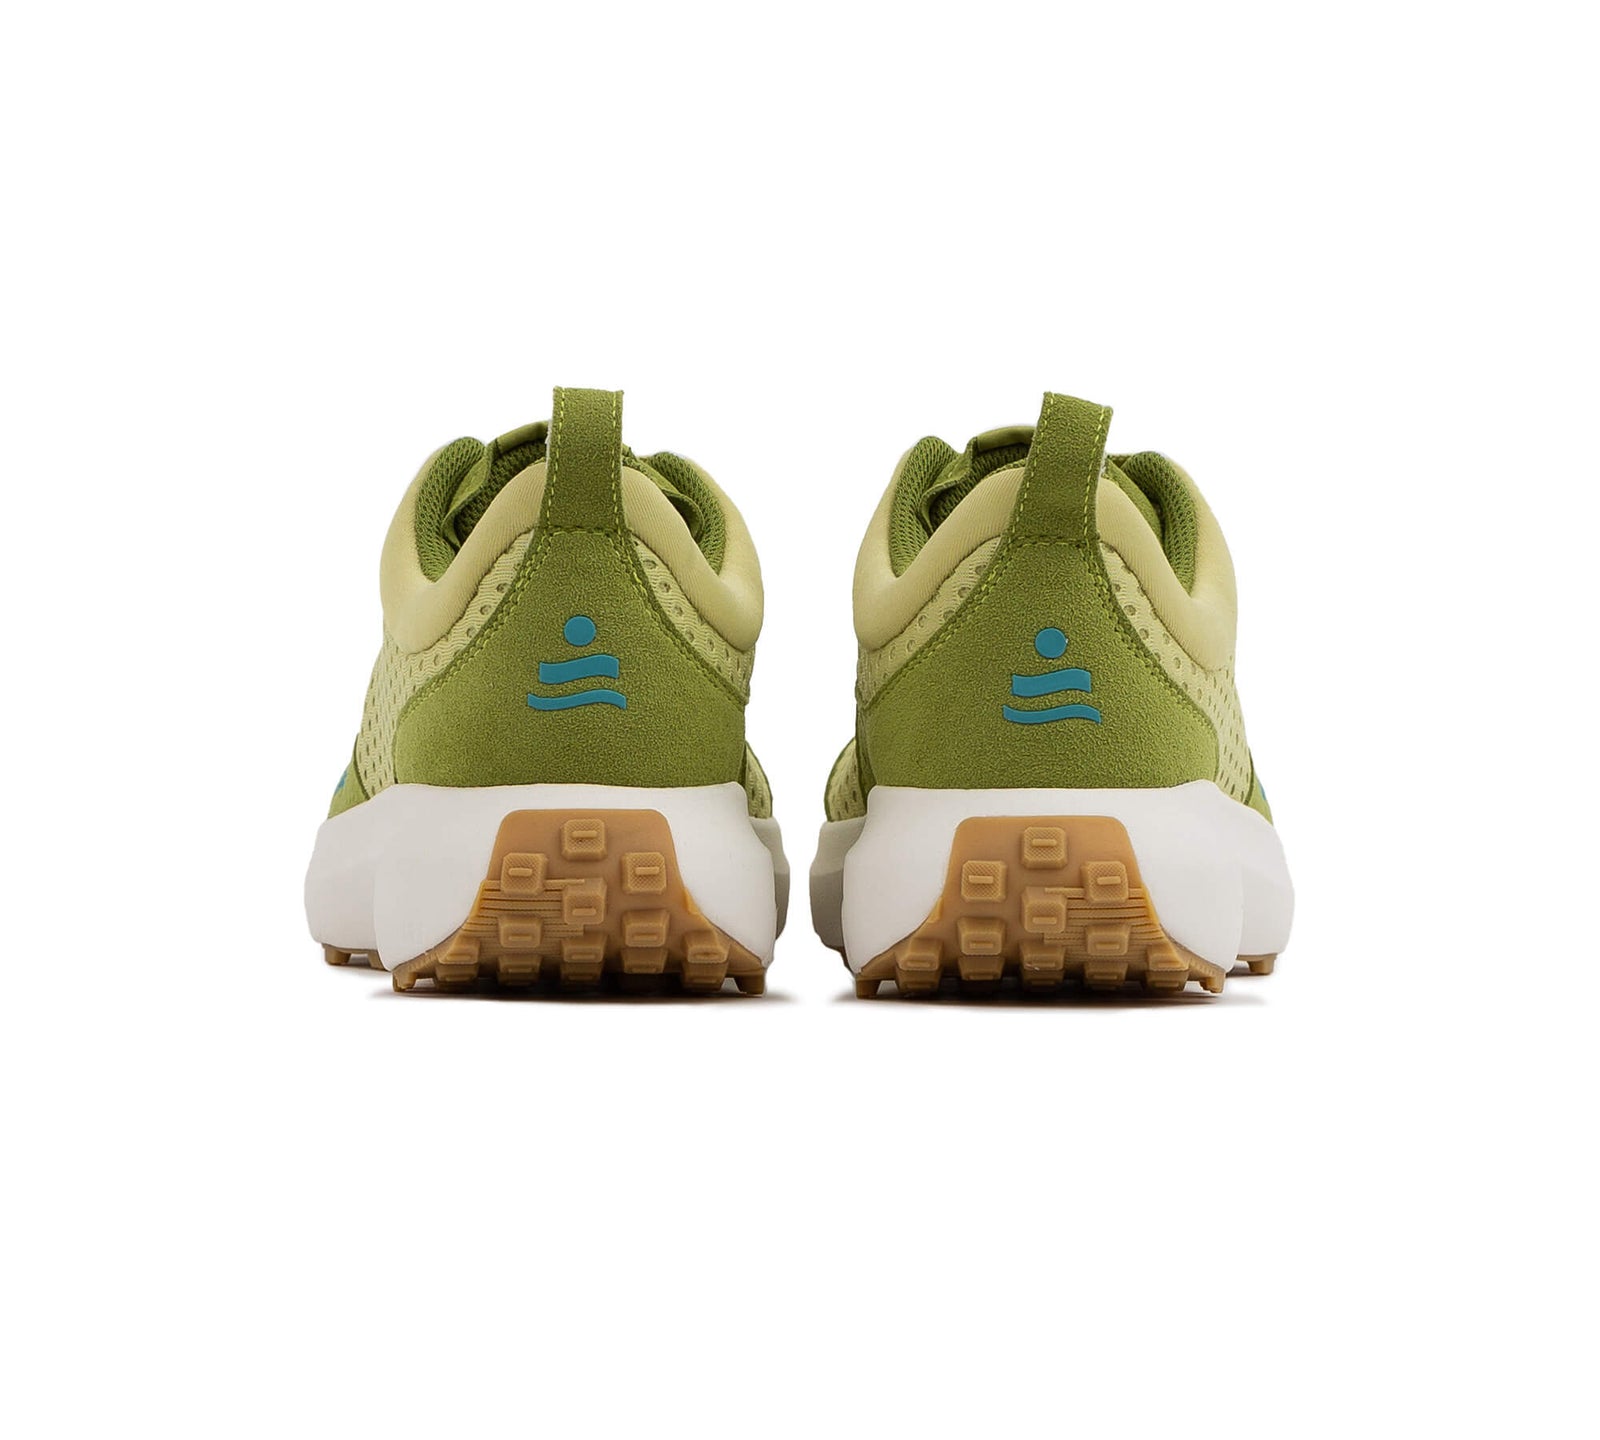 Hilma Running Shoes - Linden Green - Back of Shoes